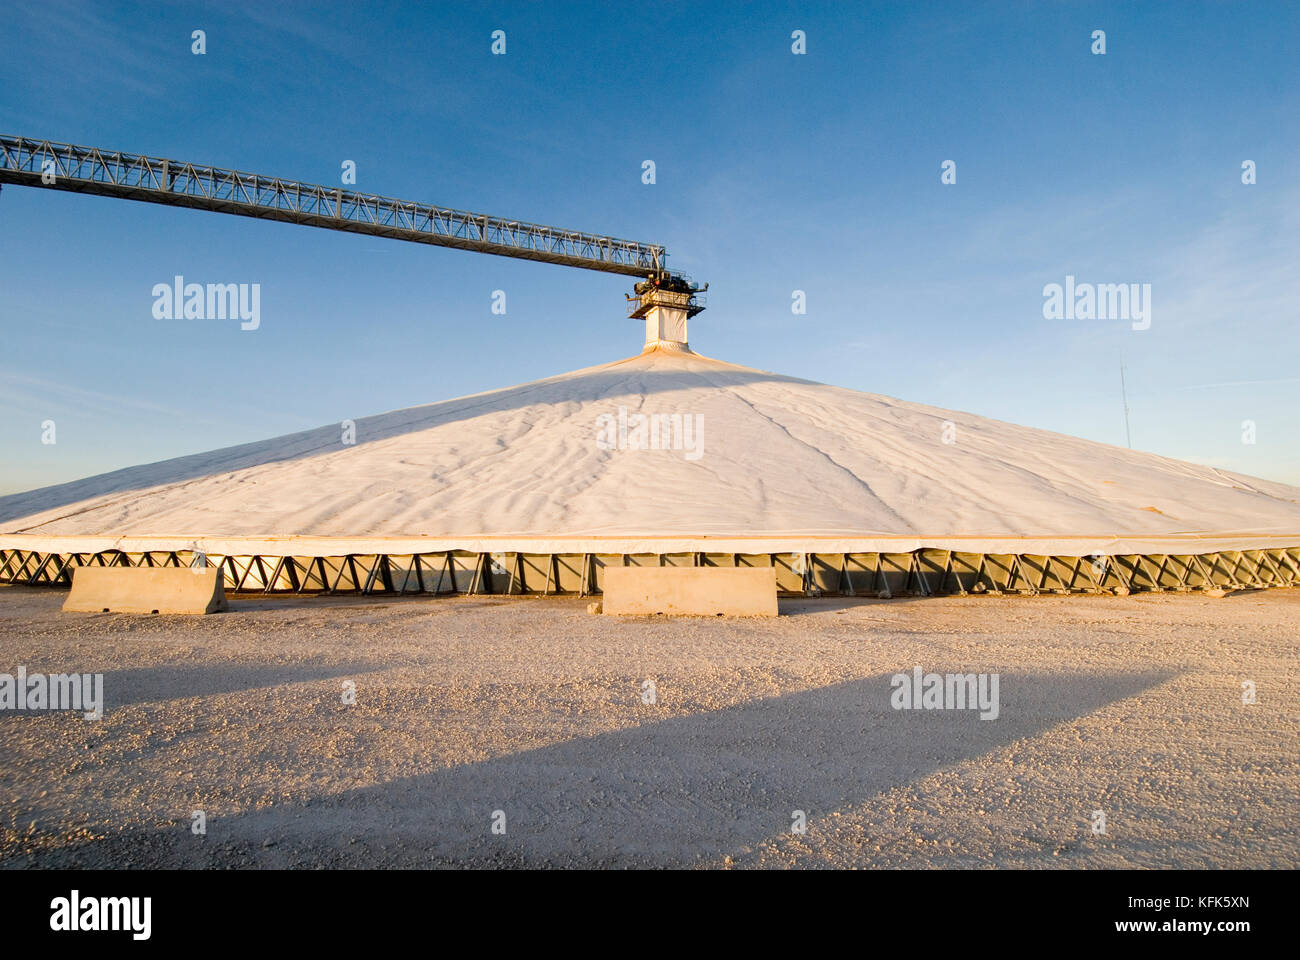 A VIEW OF A NEW TYPE OF TEMPORARY GRAIN ELEVATOR MADE OF PLASTIC TARPS HOLDS 2 MILLION BUSHELS OF CORN Stock Photo